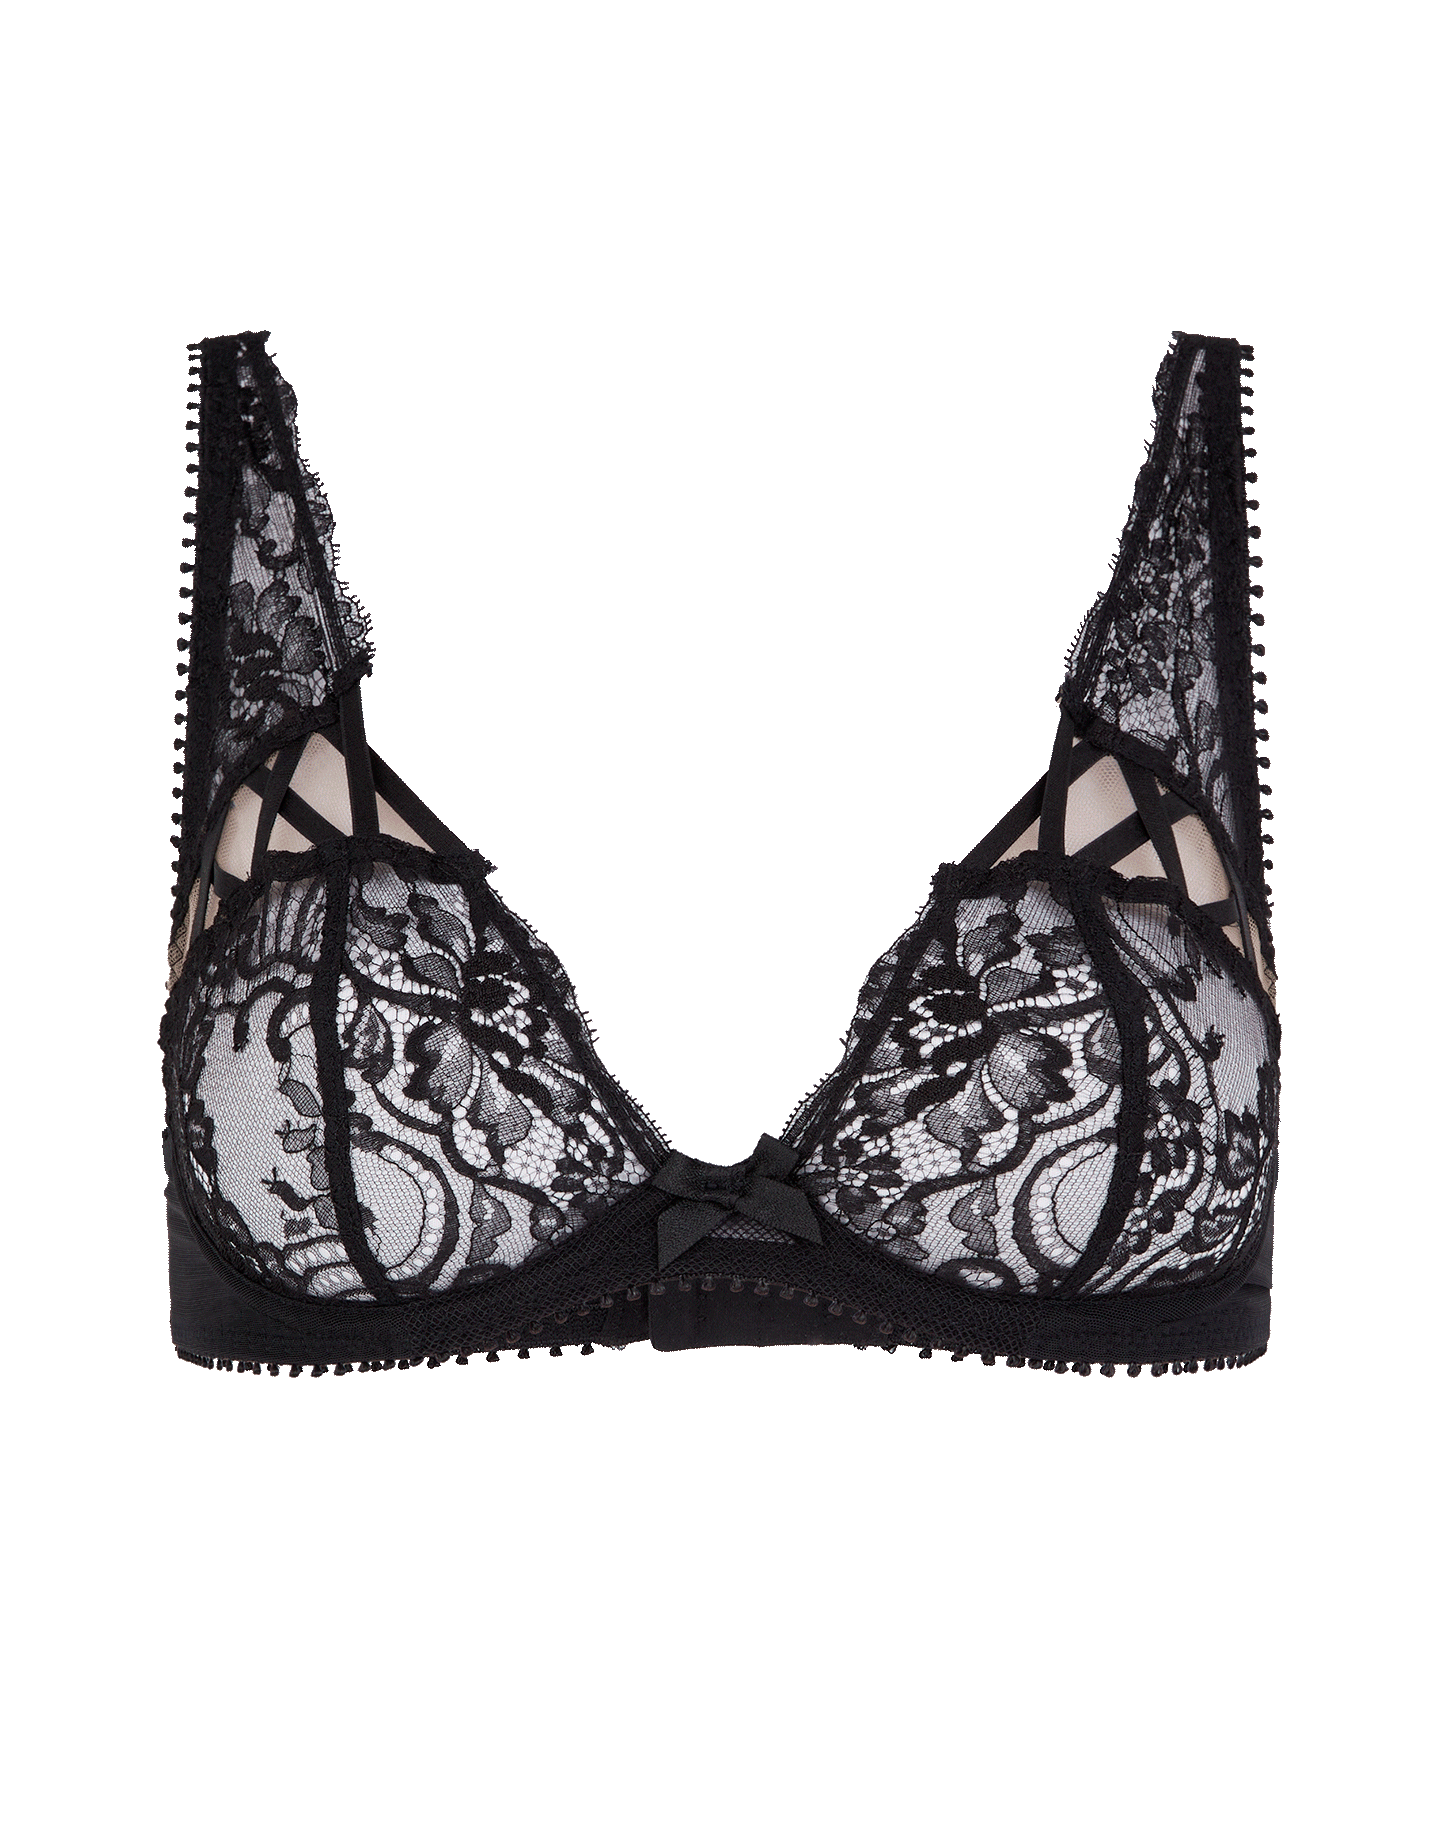 AGENT PROVOCATEUR NUDE SPARKLE BRA 34B & SIZE AP 2 SMALL BRIEF & THONG BNWT  - Helia Beer Co